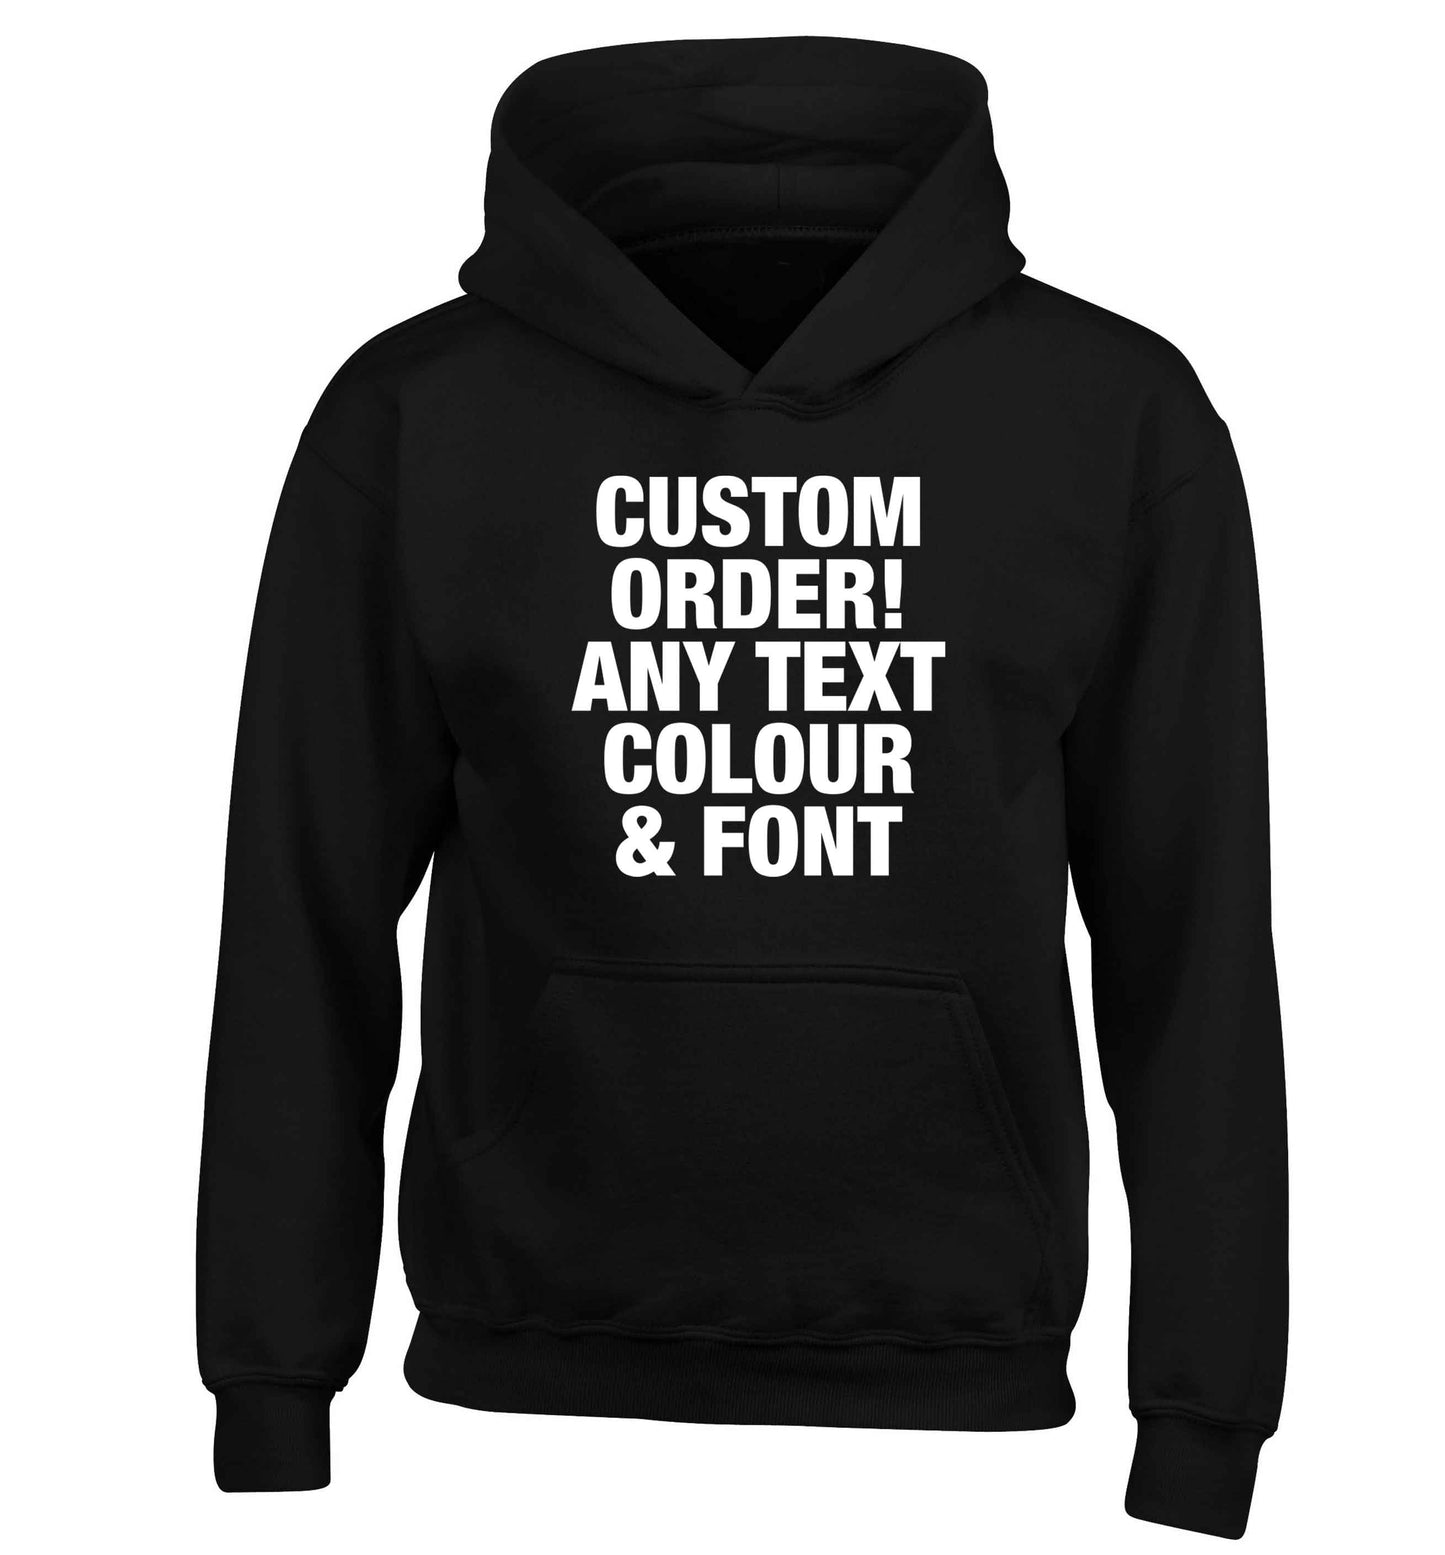 Custom order any text colour and font children's black hoodie 12-13 Years